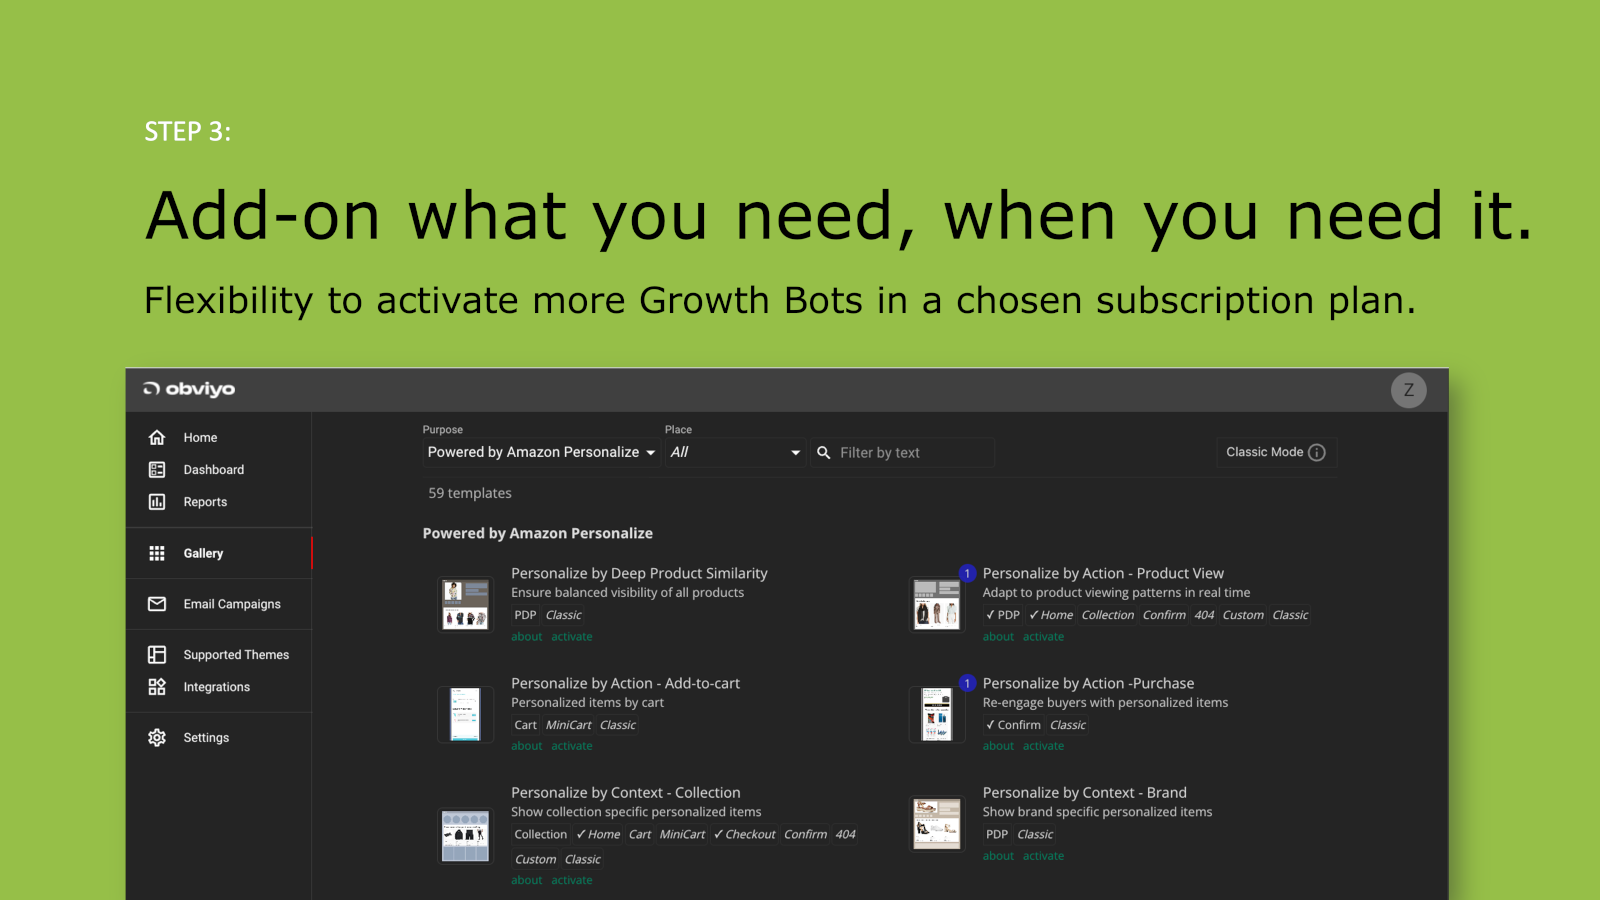 Add more Growth Bots as you need them.